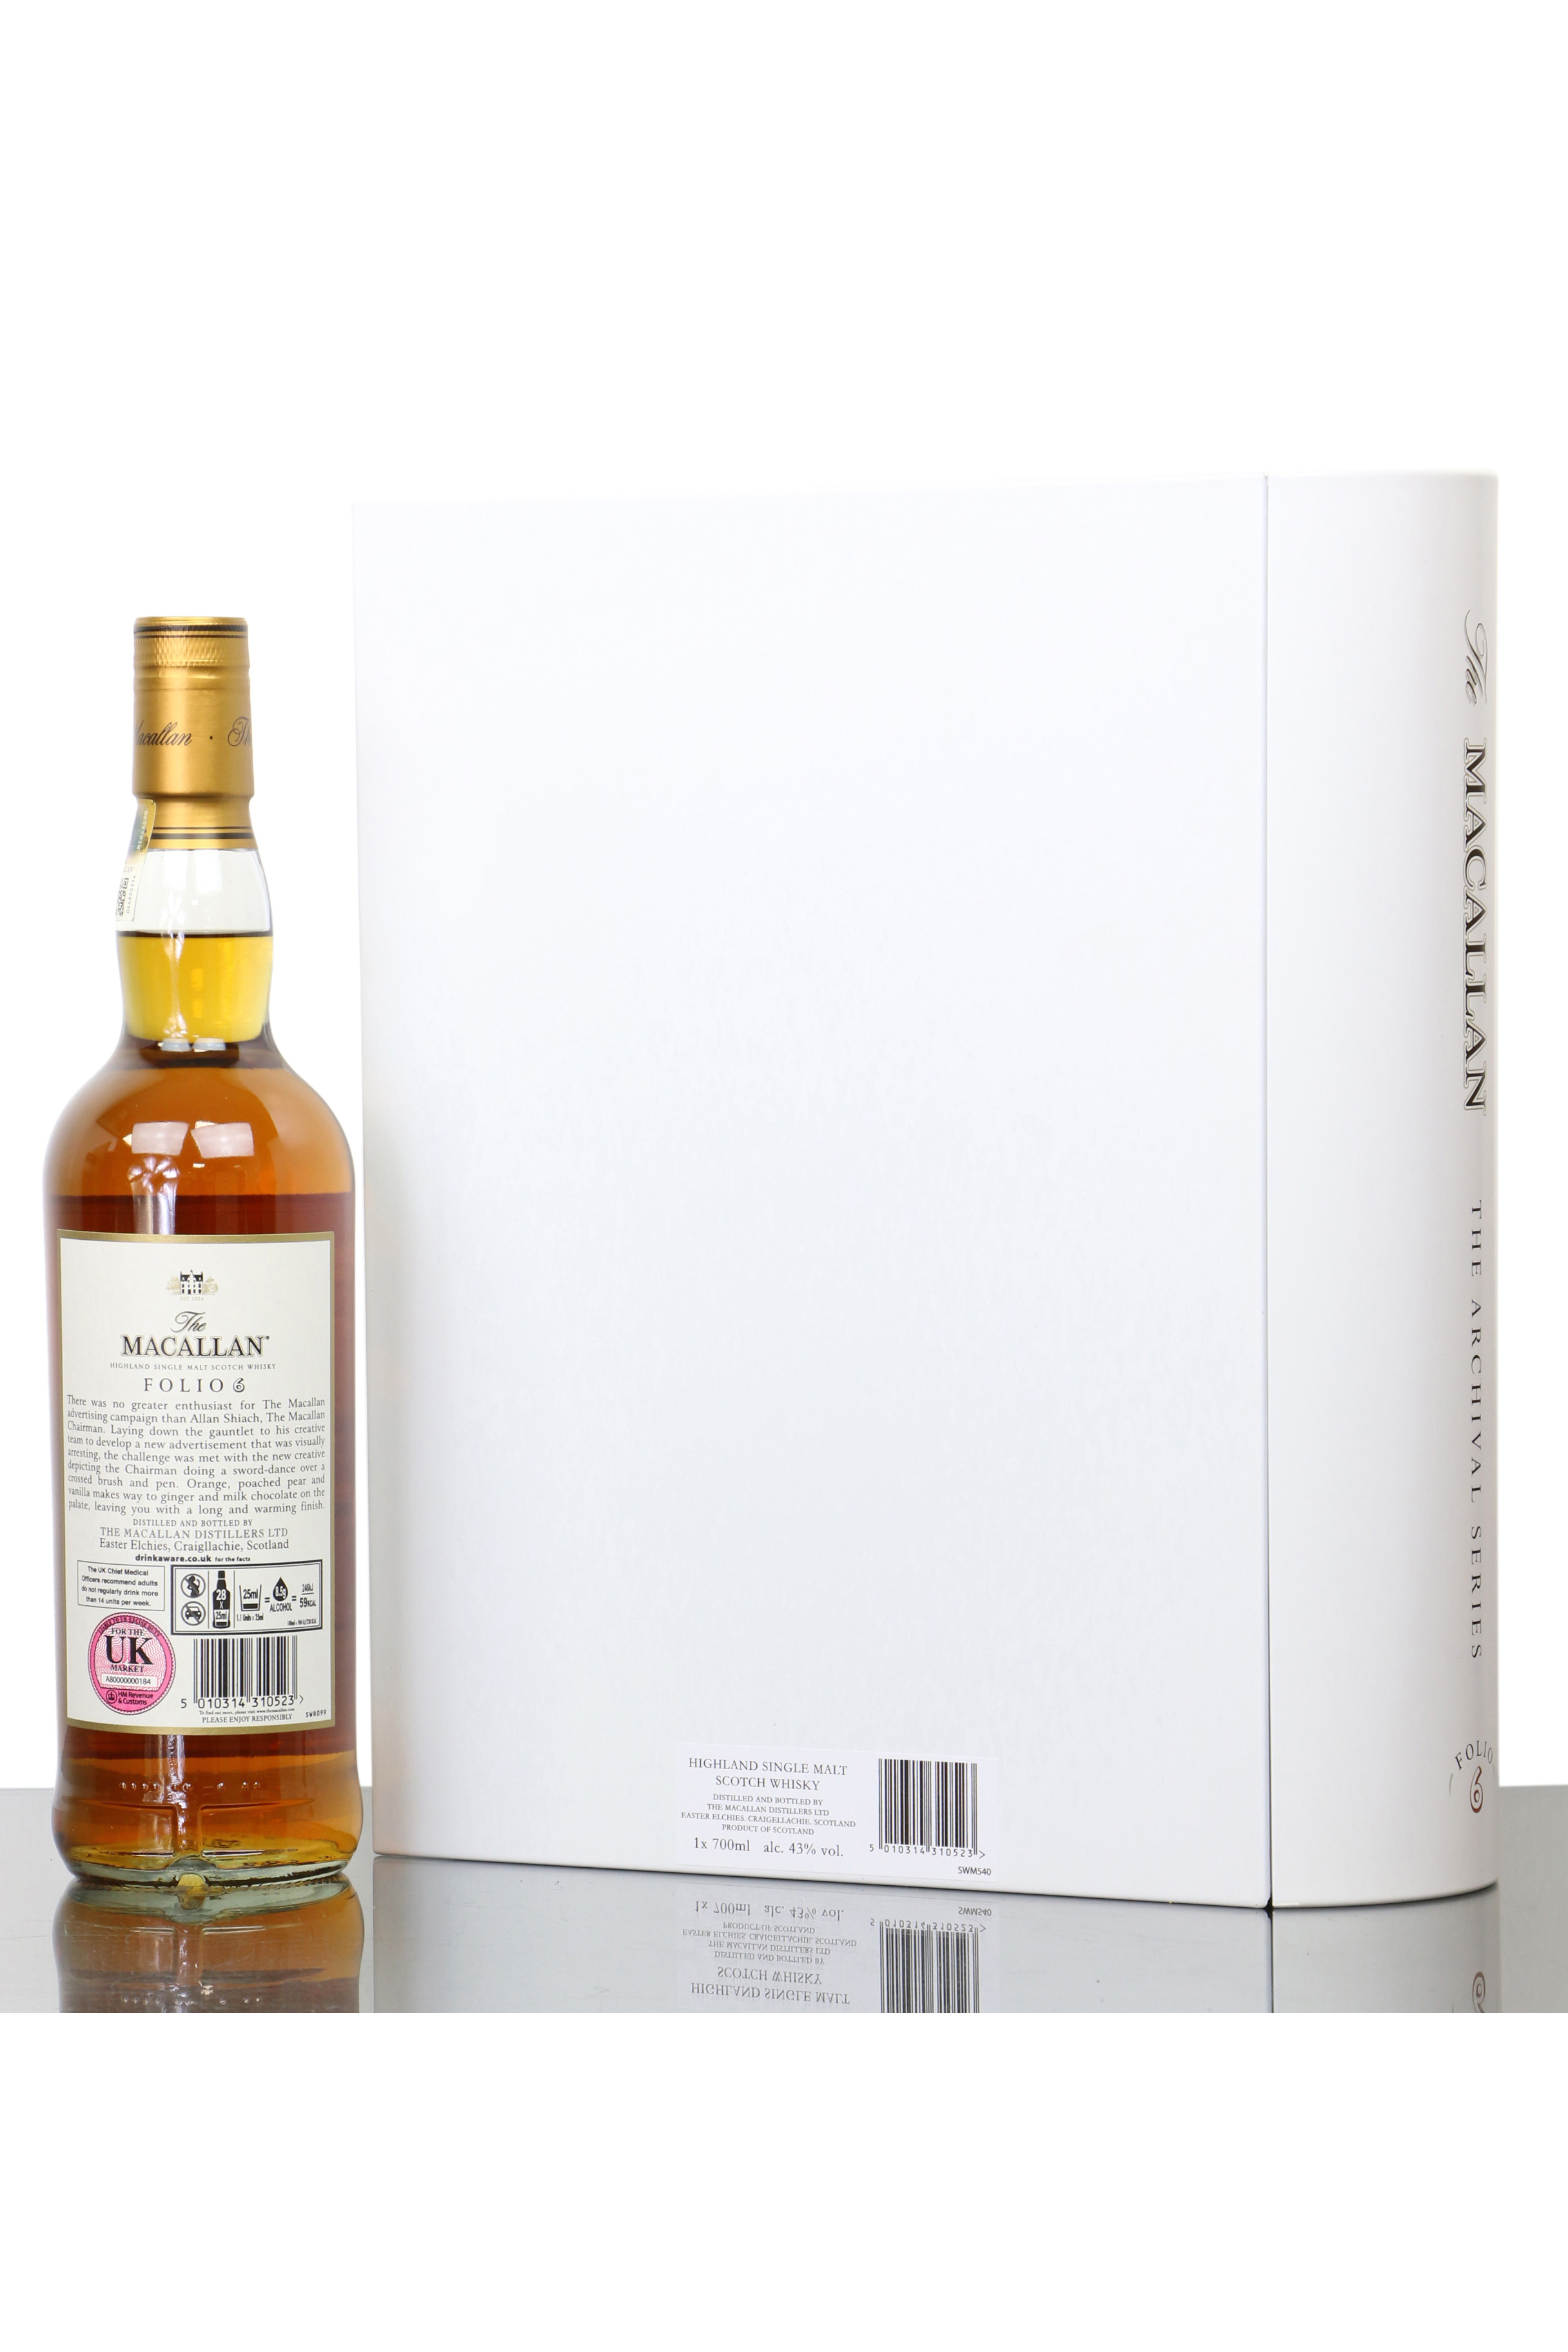 Macallan The Archival Series - Folio 6 - Just Whisky Auctions